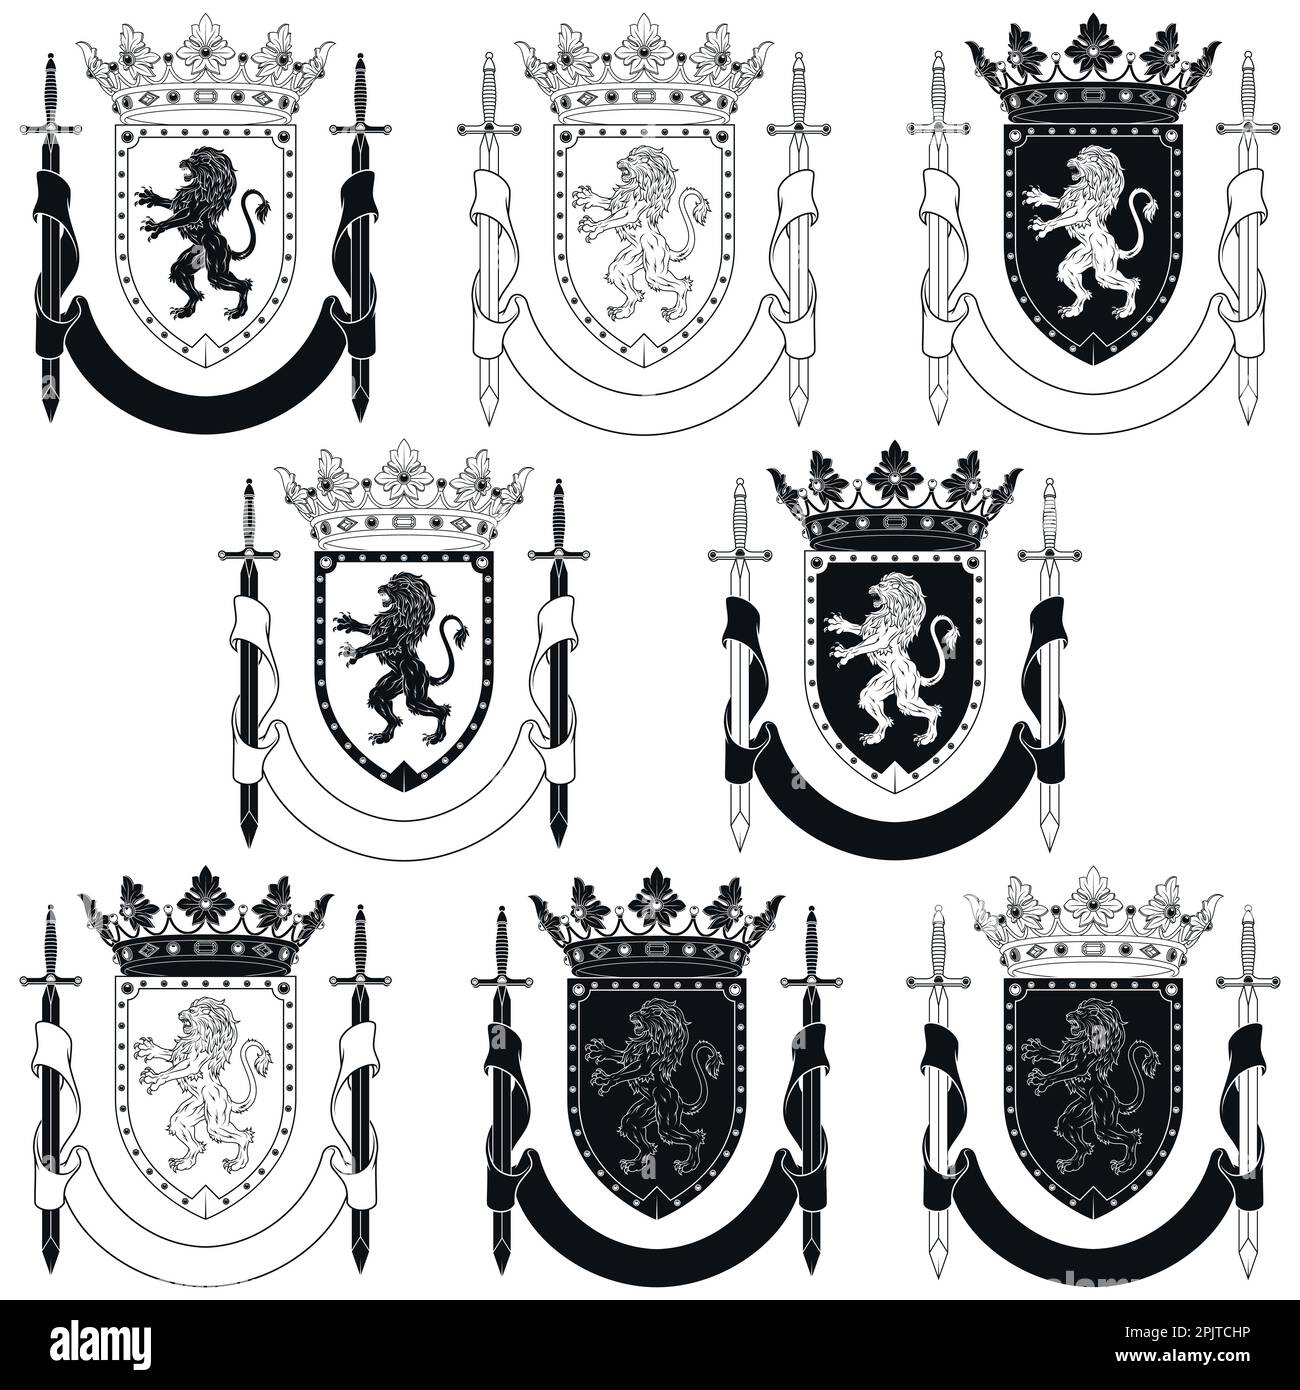 Vector design of heraldic shield of the Middle Ages, noble shield of the European monarchy with rampant lion, crowns, ribbon and swords Stock Vector